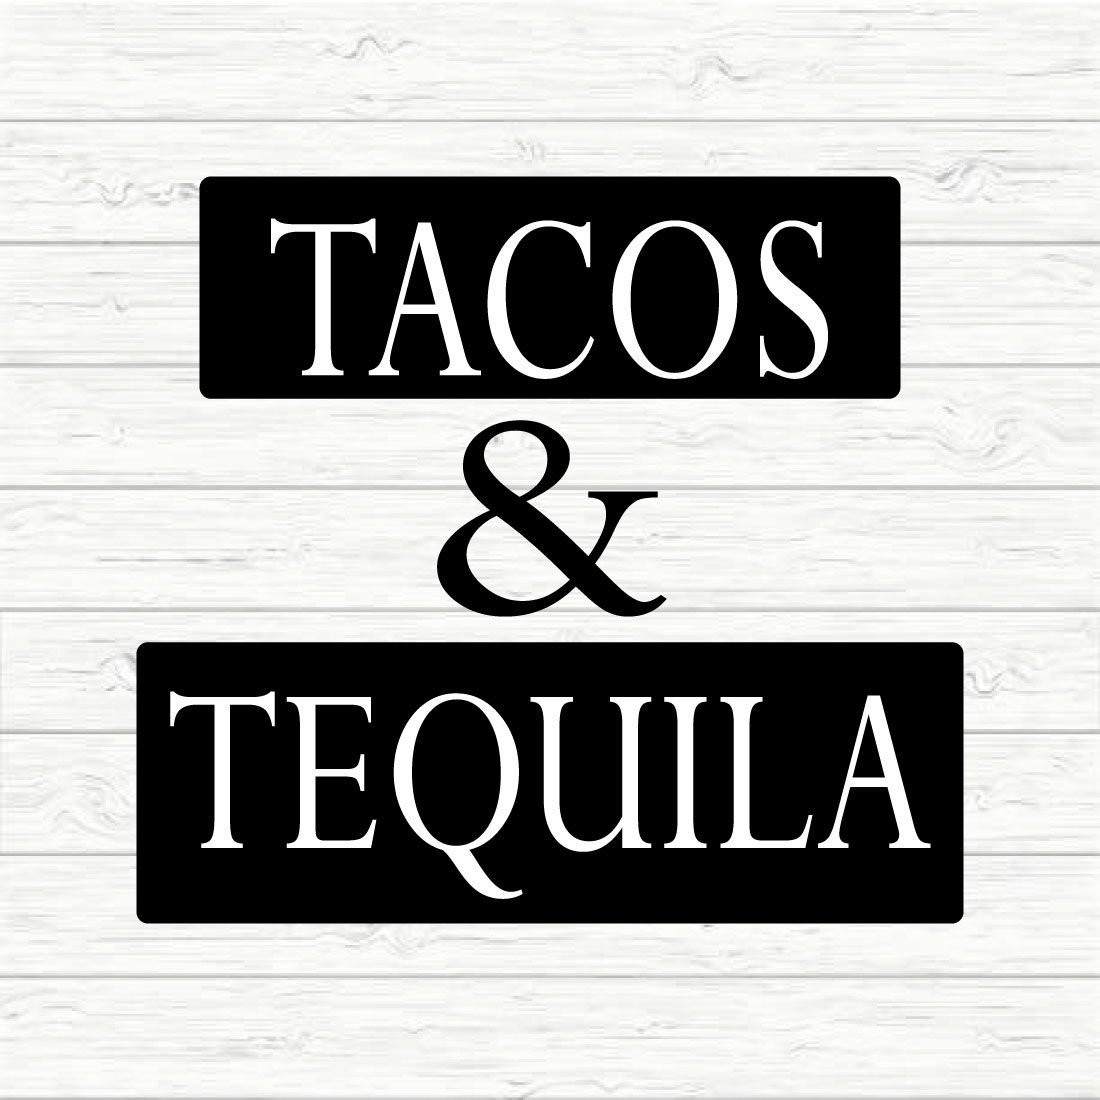 Tacos & Tequila preview image.